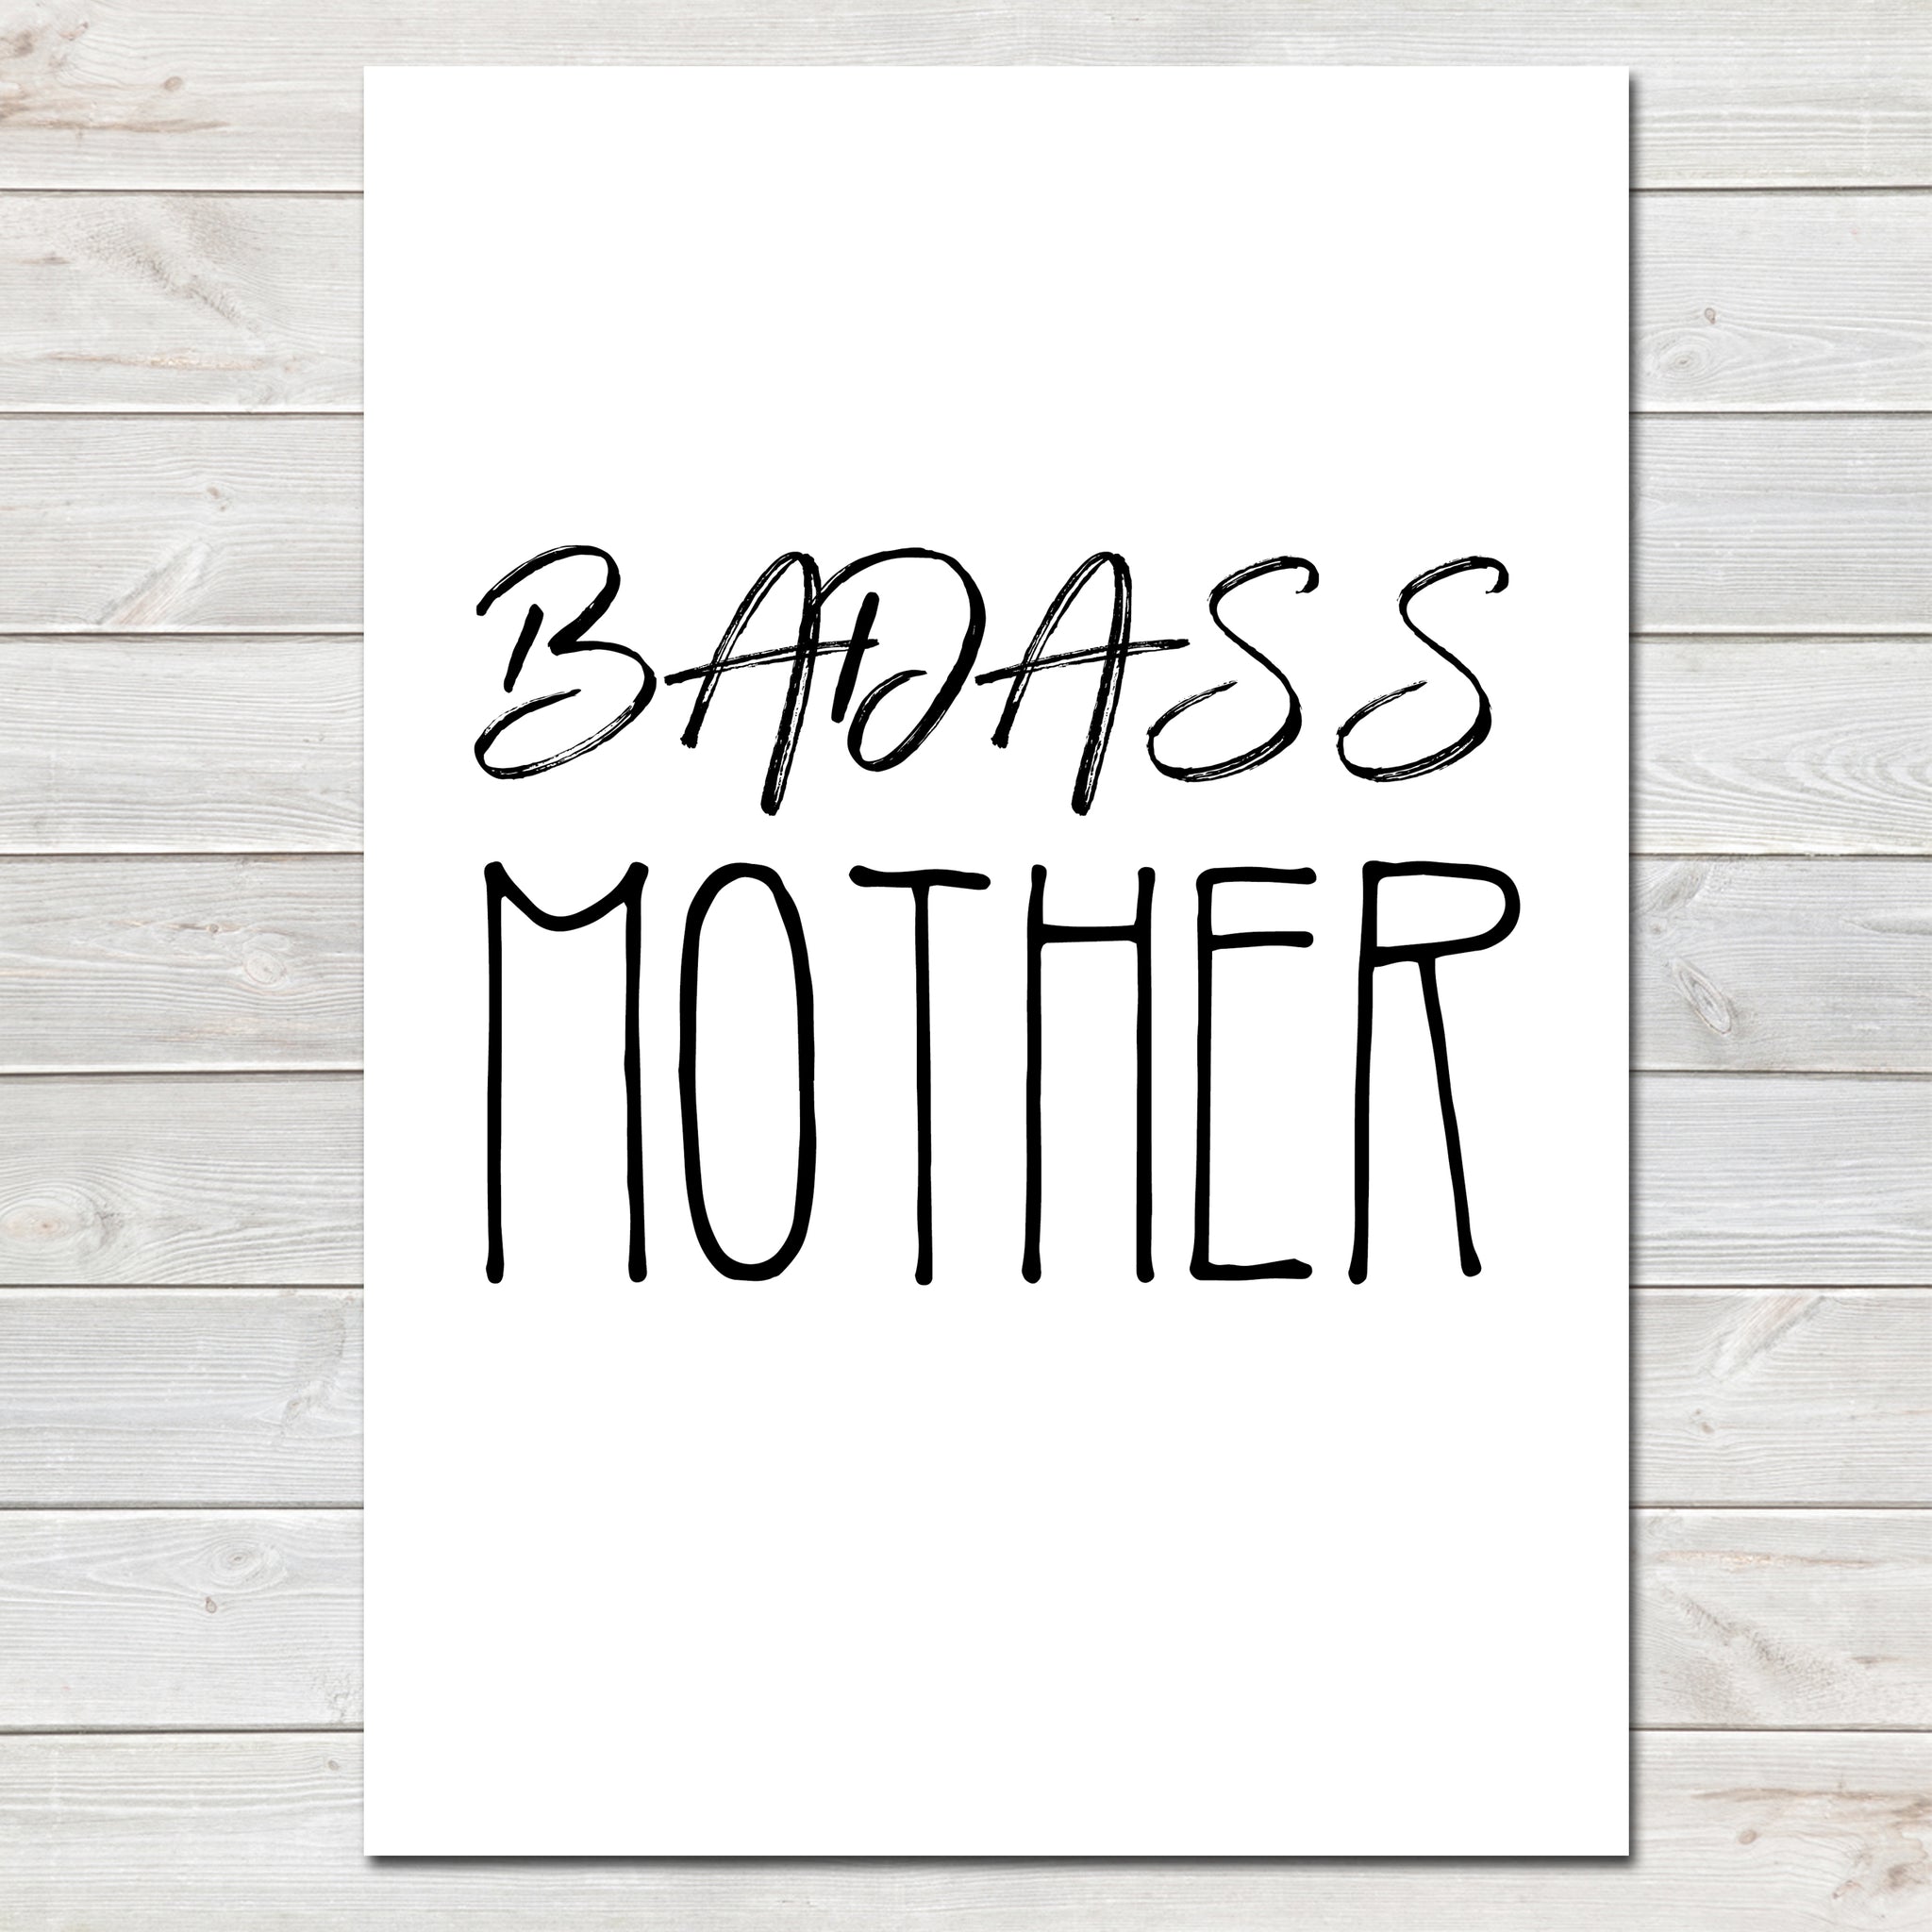 Mothers Day Print 'Badass Mother' Fun Personalised Poster Gift